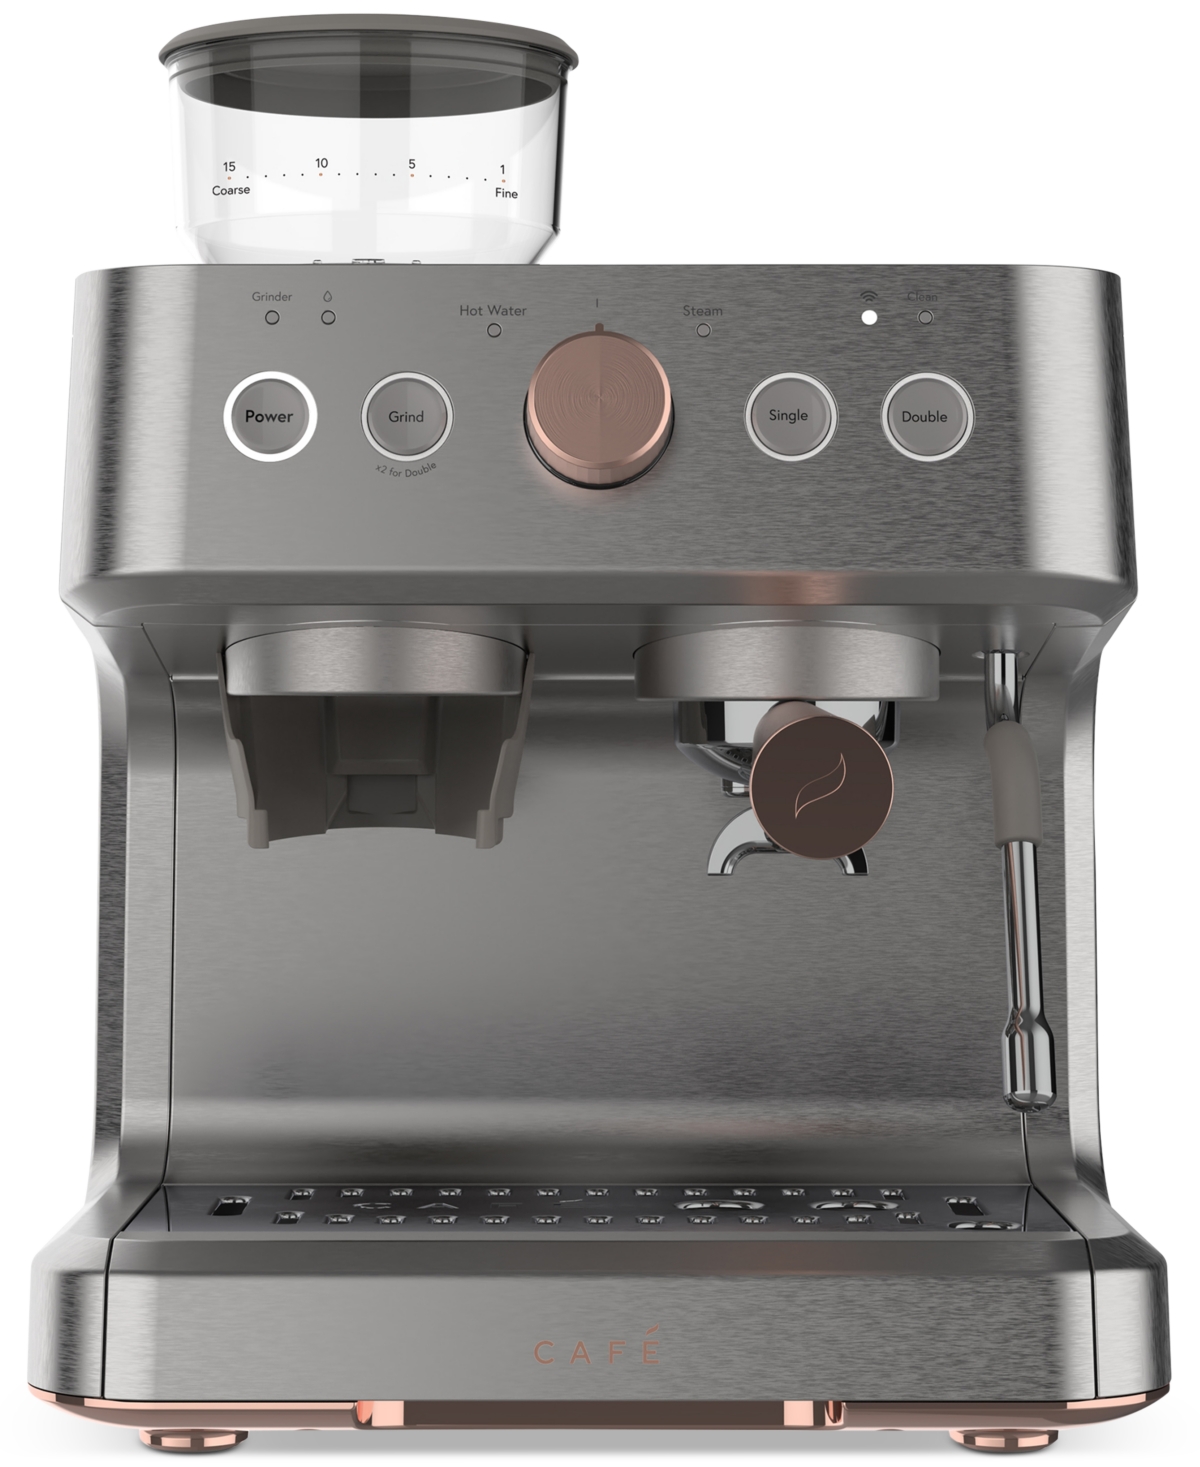 Cafe Bellissimo Semi-automatic Espresso Machine & Frother In Steel Silver